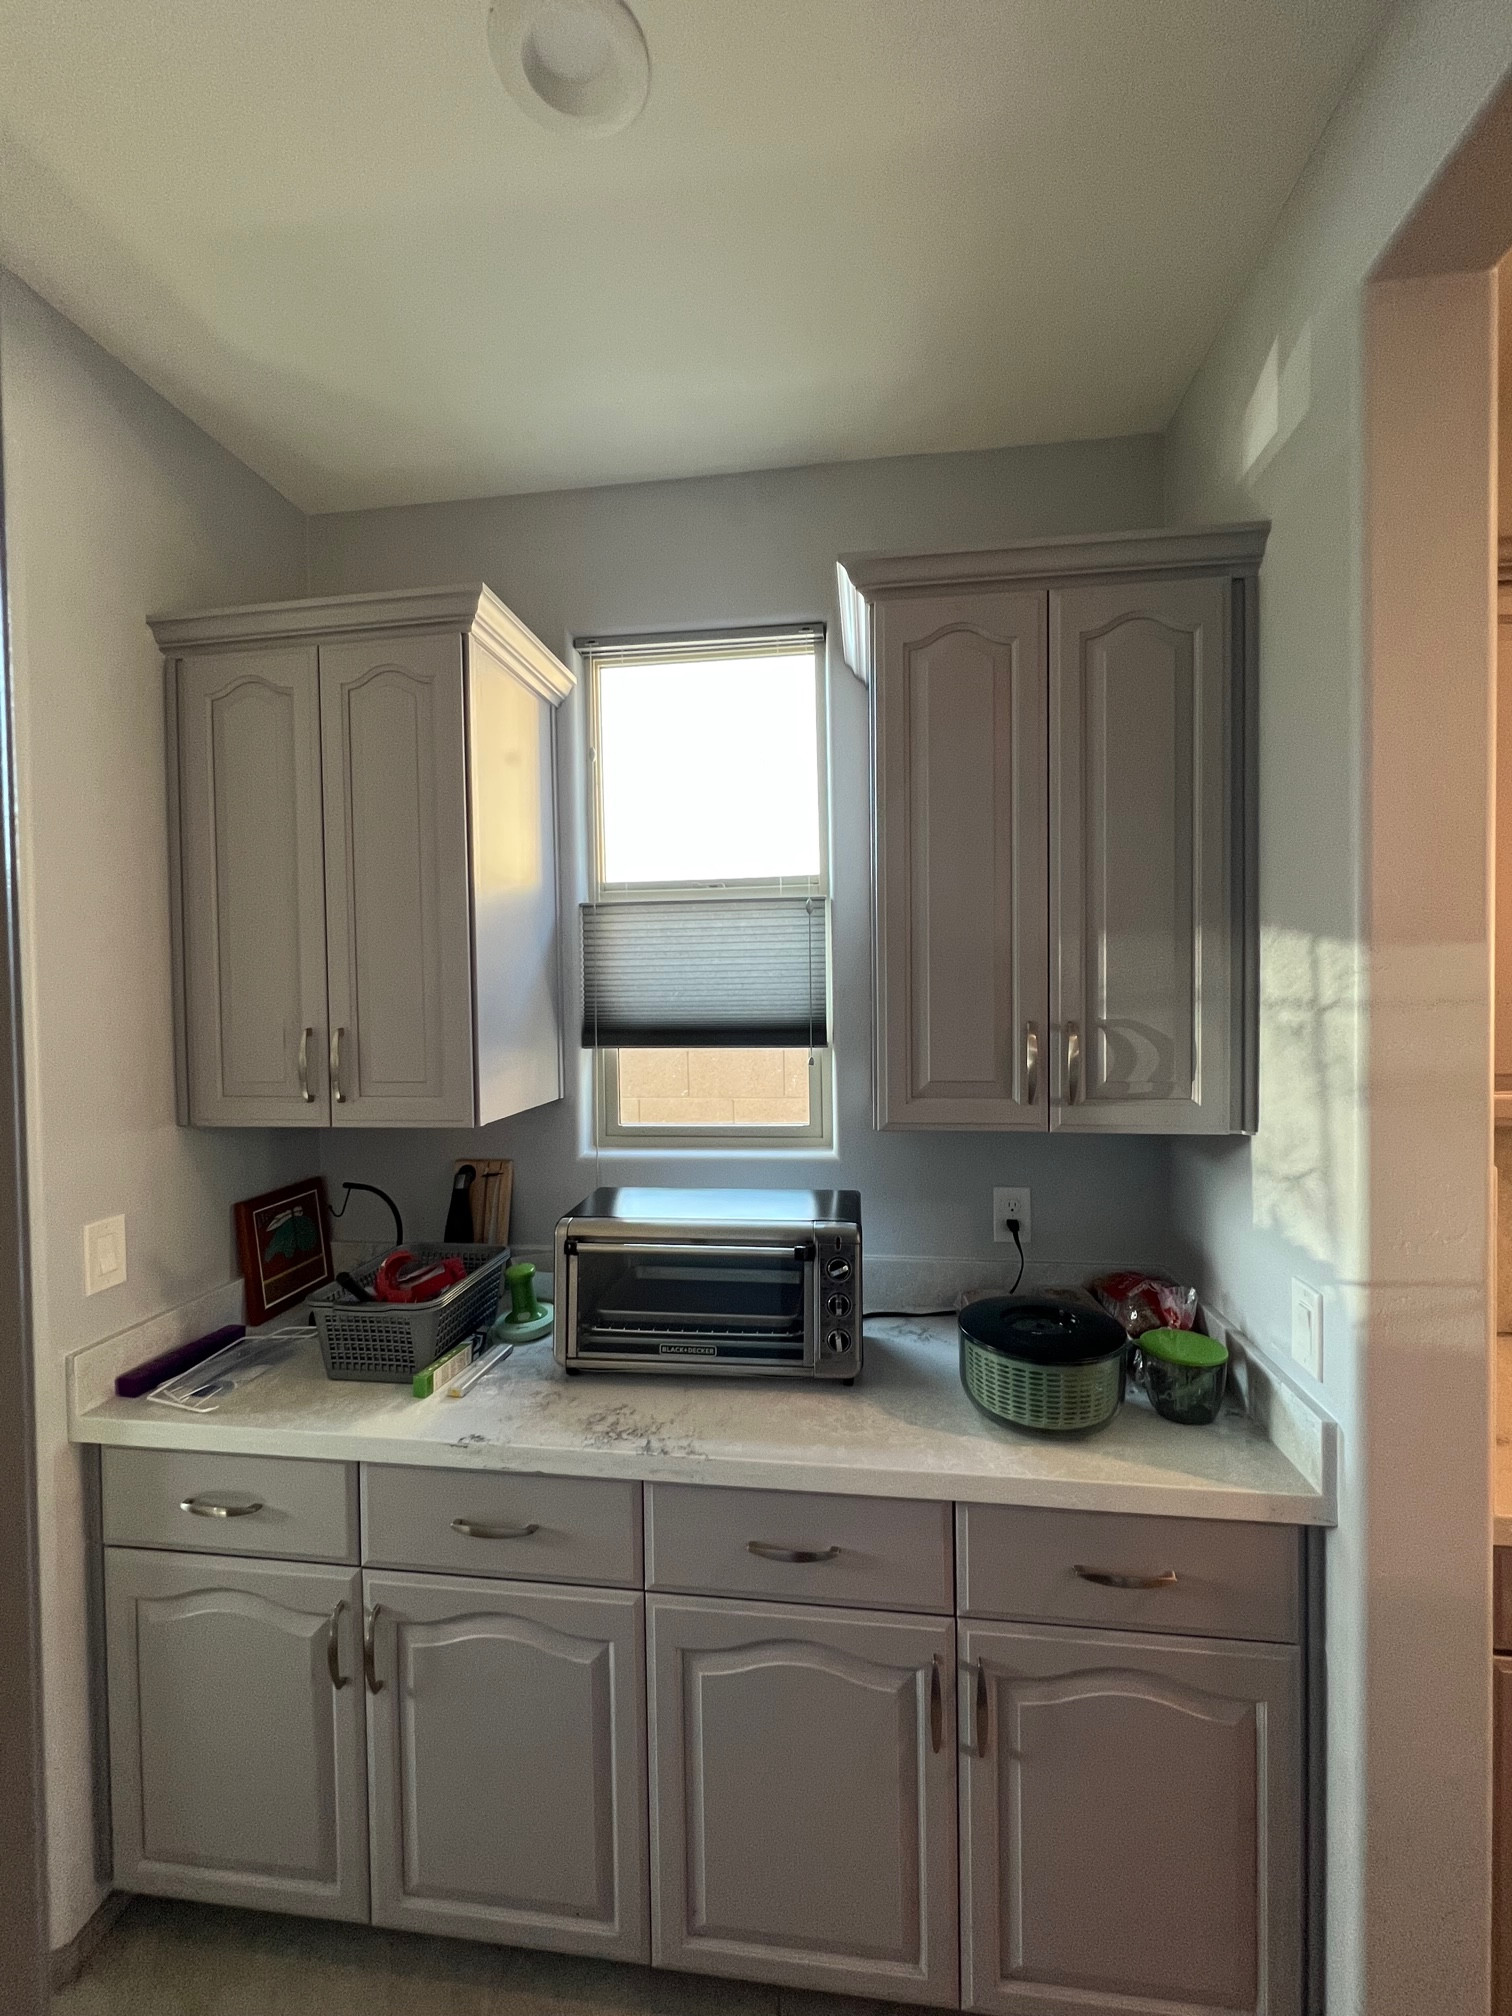 Kitchen Reface and Butler Pantry Build and Quartz Countertops